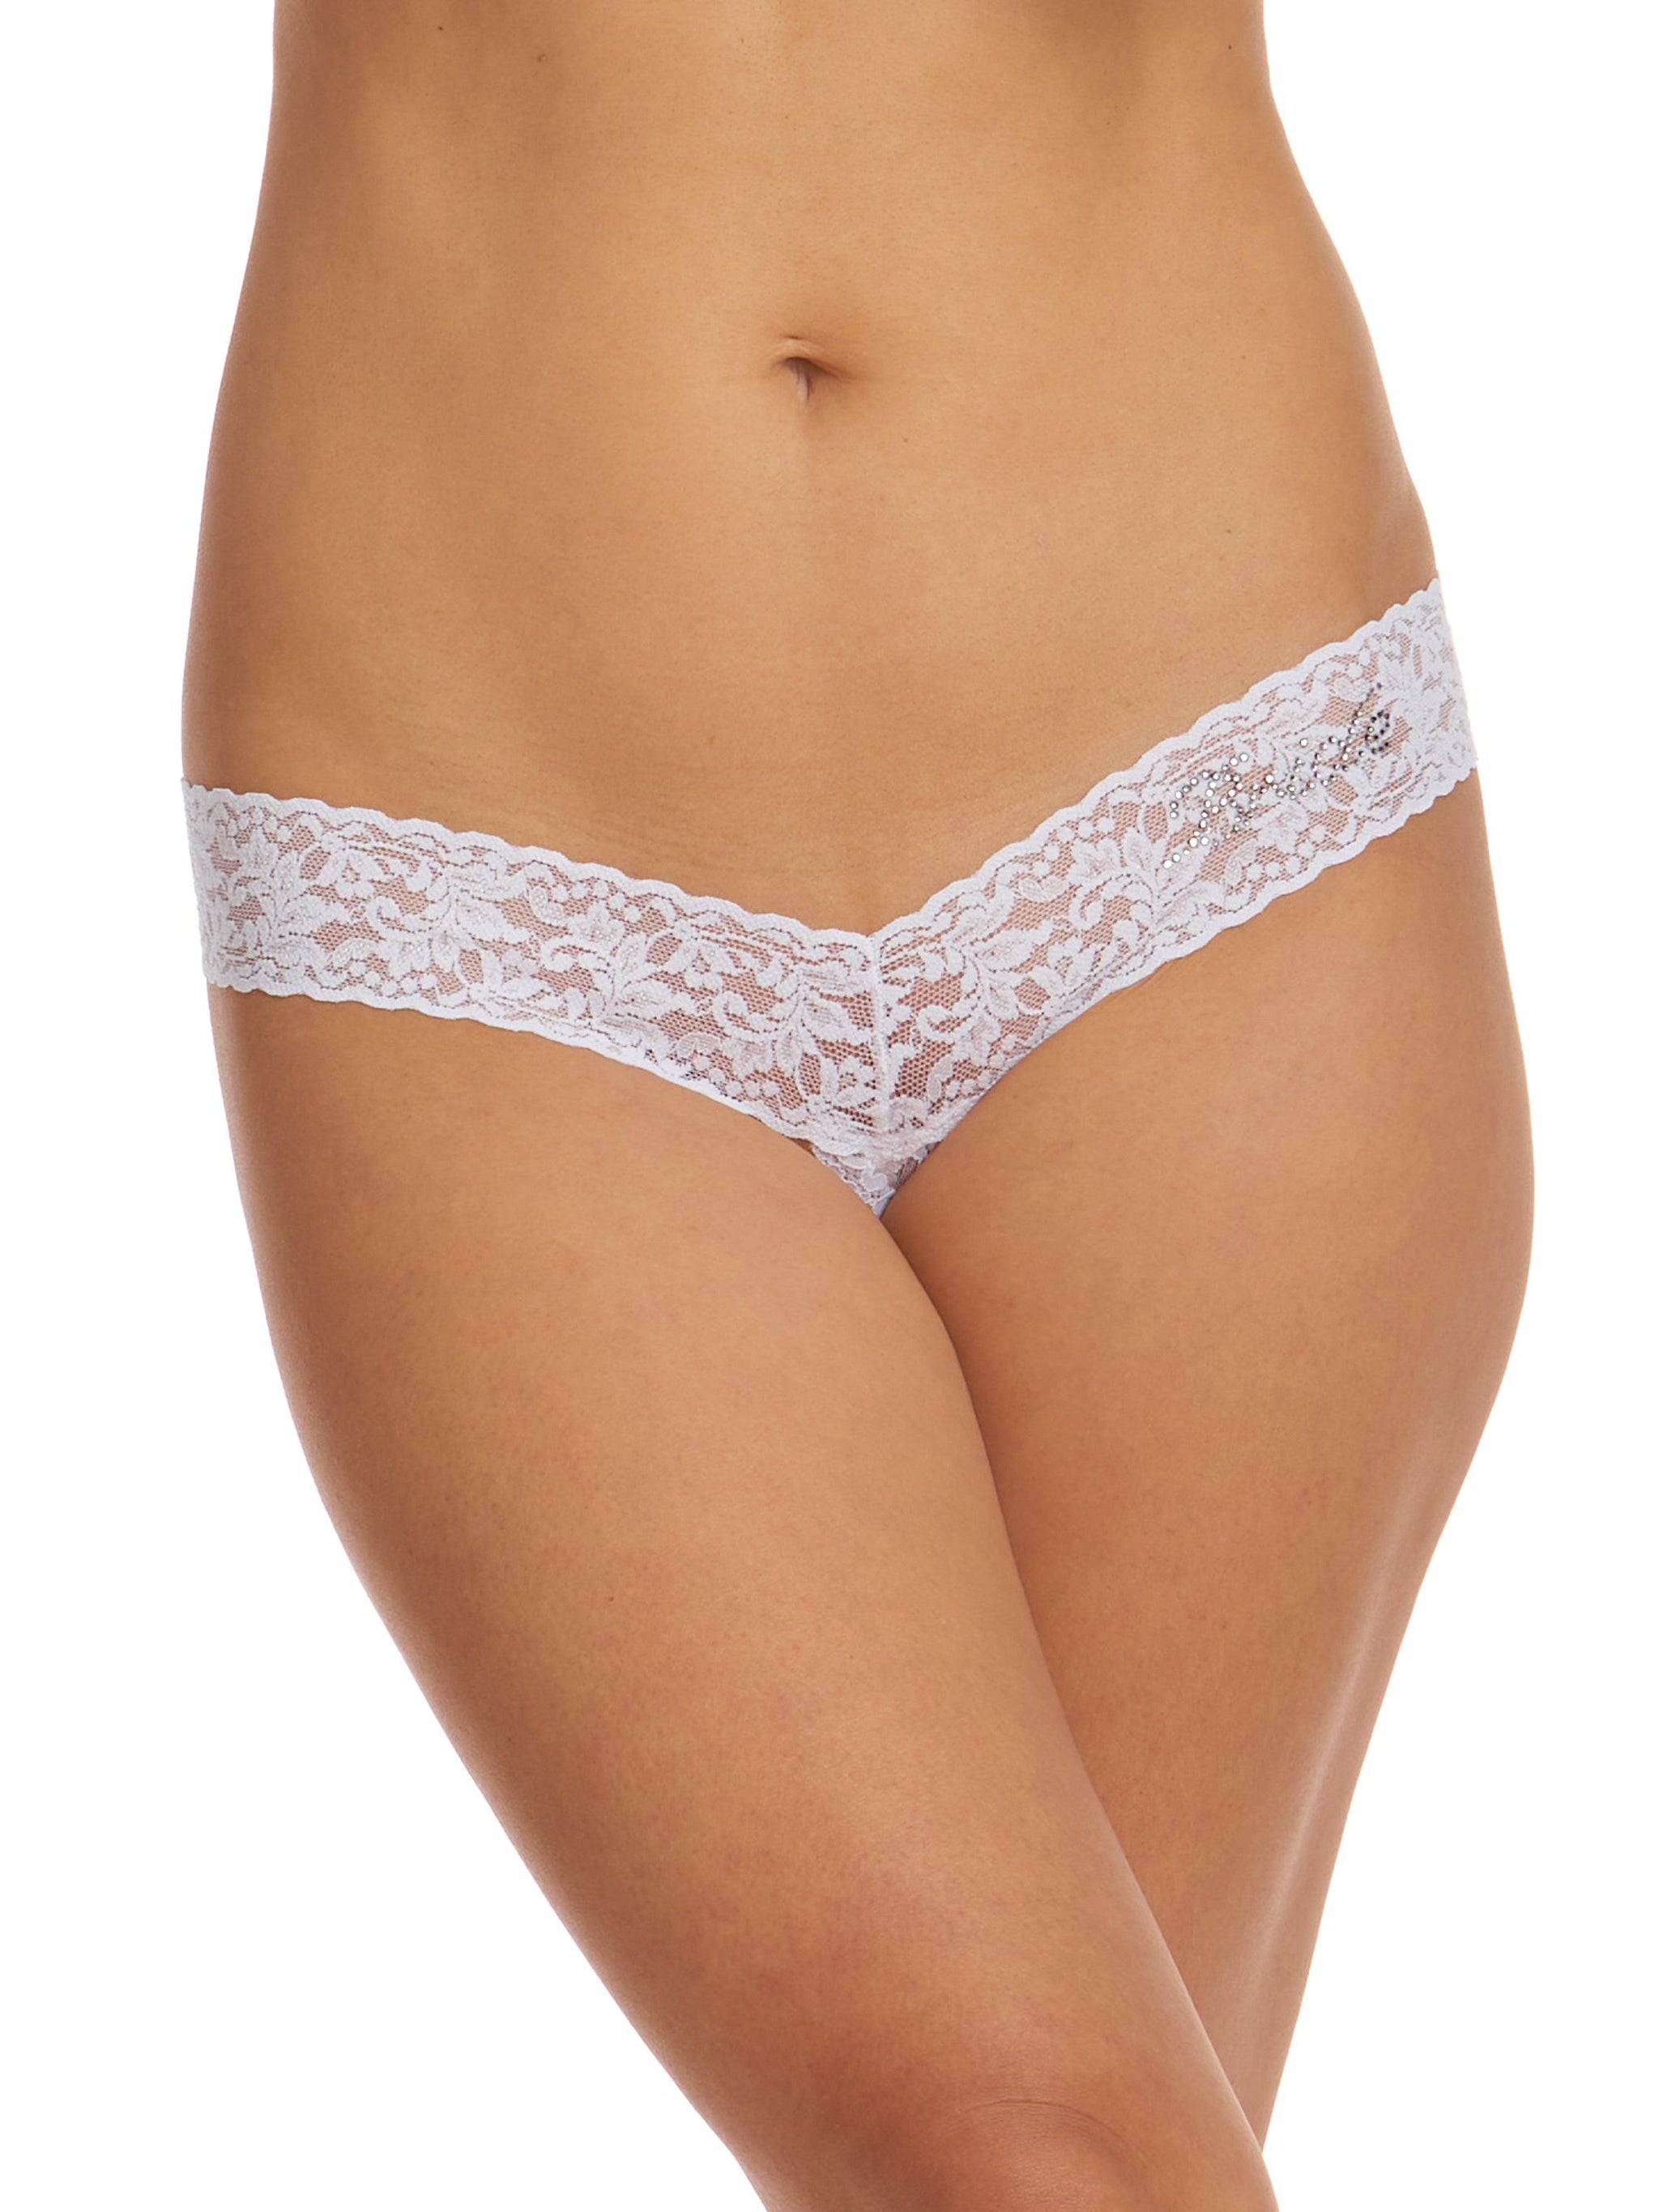 Handmade White Crochet Crotchless T String Panties, Sexy Cotton Open Crotch  Lingerie Underwear From Dh180255, $6.04